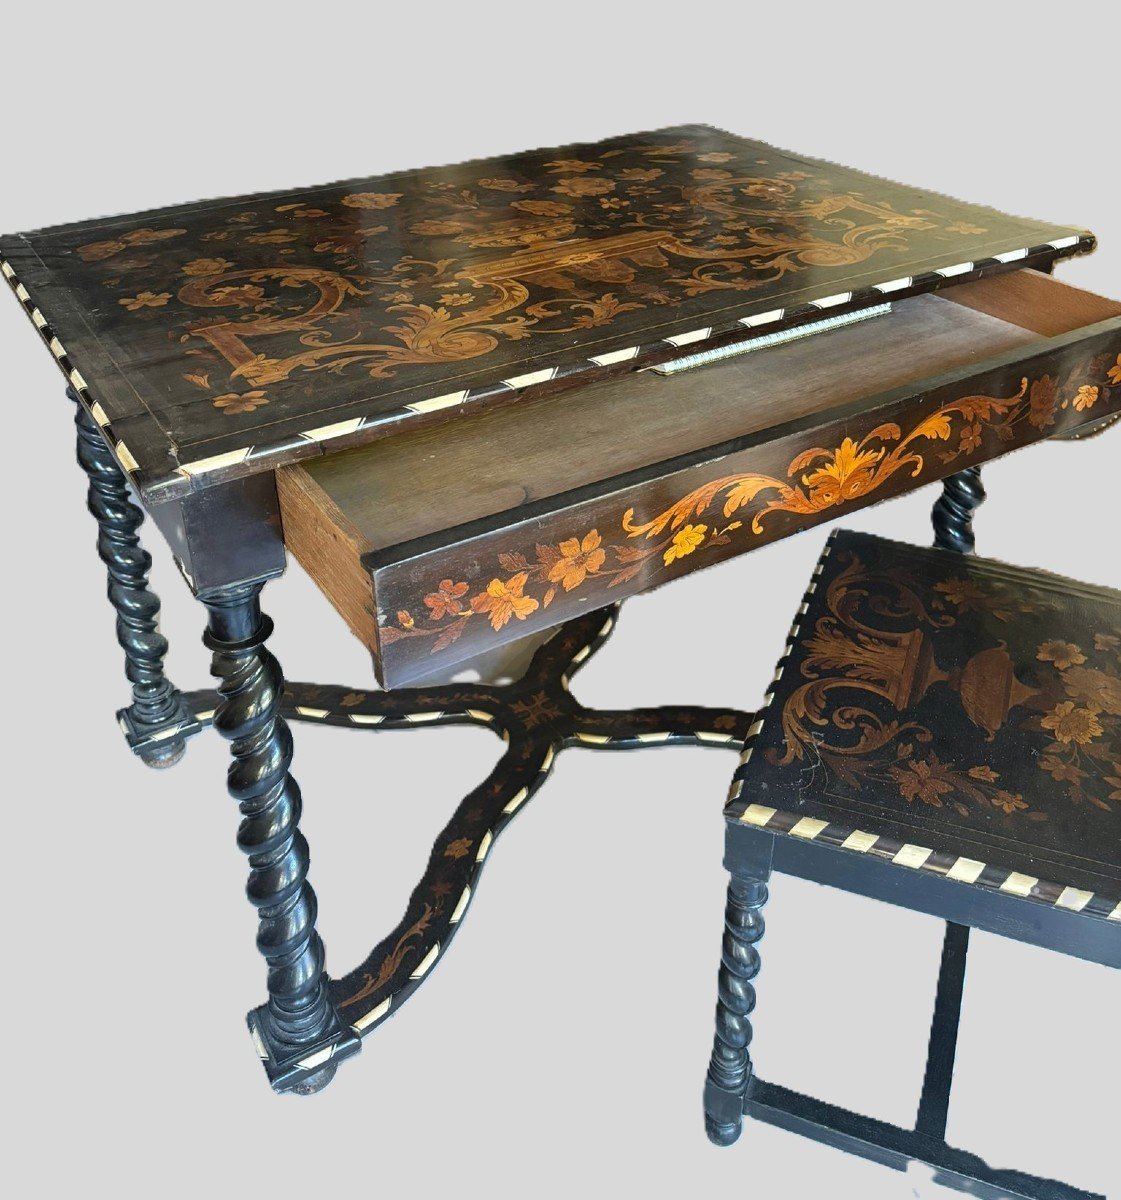 Center Desk Table With Chair, Louis XIV France Style, Nineteenth Century Inlays In Various Woods, Ivories.-photo-2